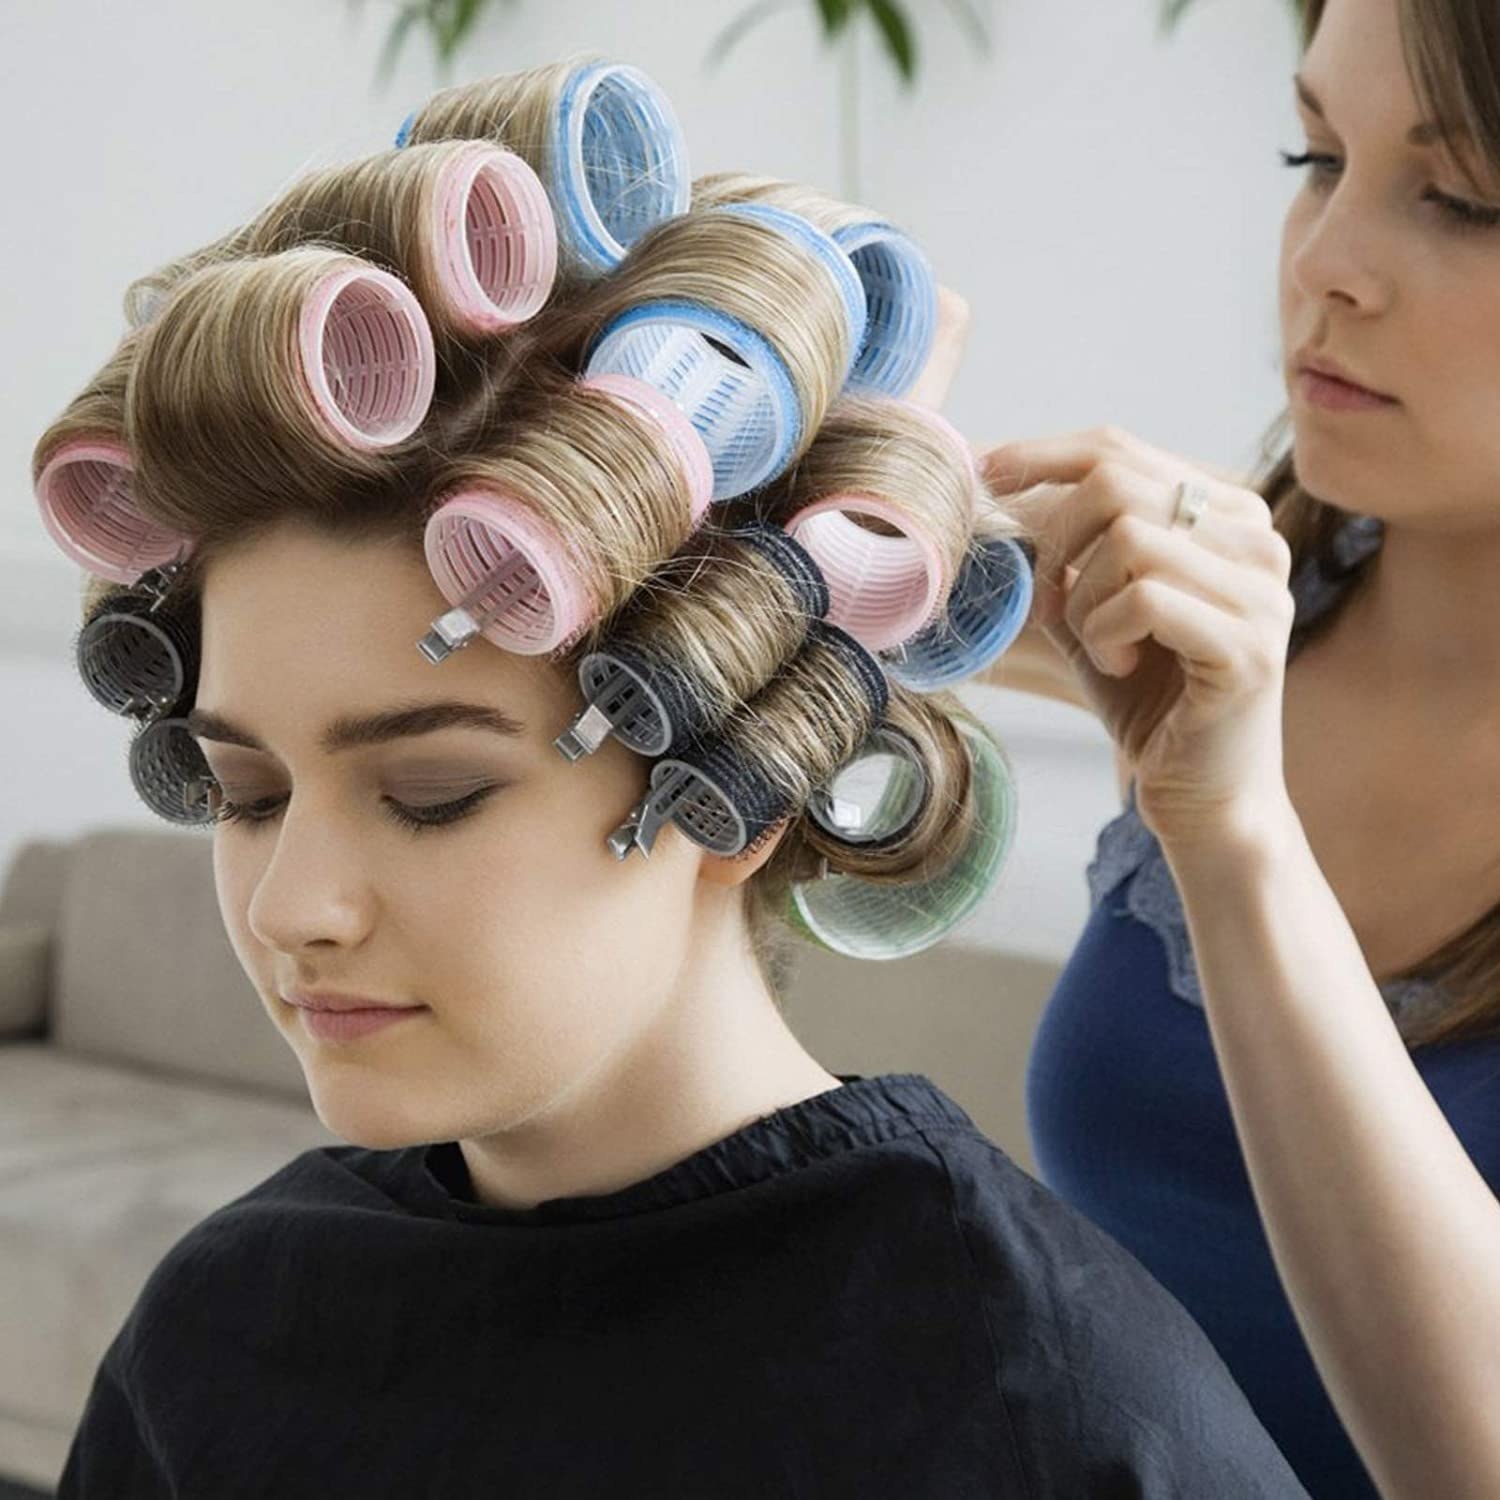 Someone sitting with the curlers in their hair while someone else puts them in